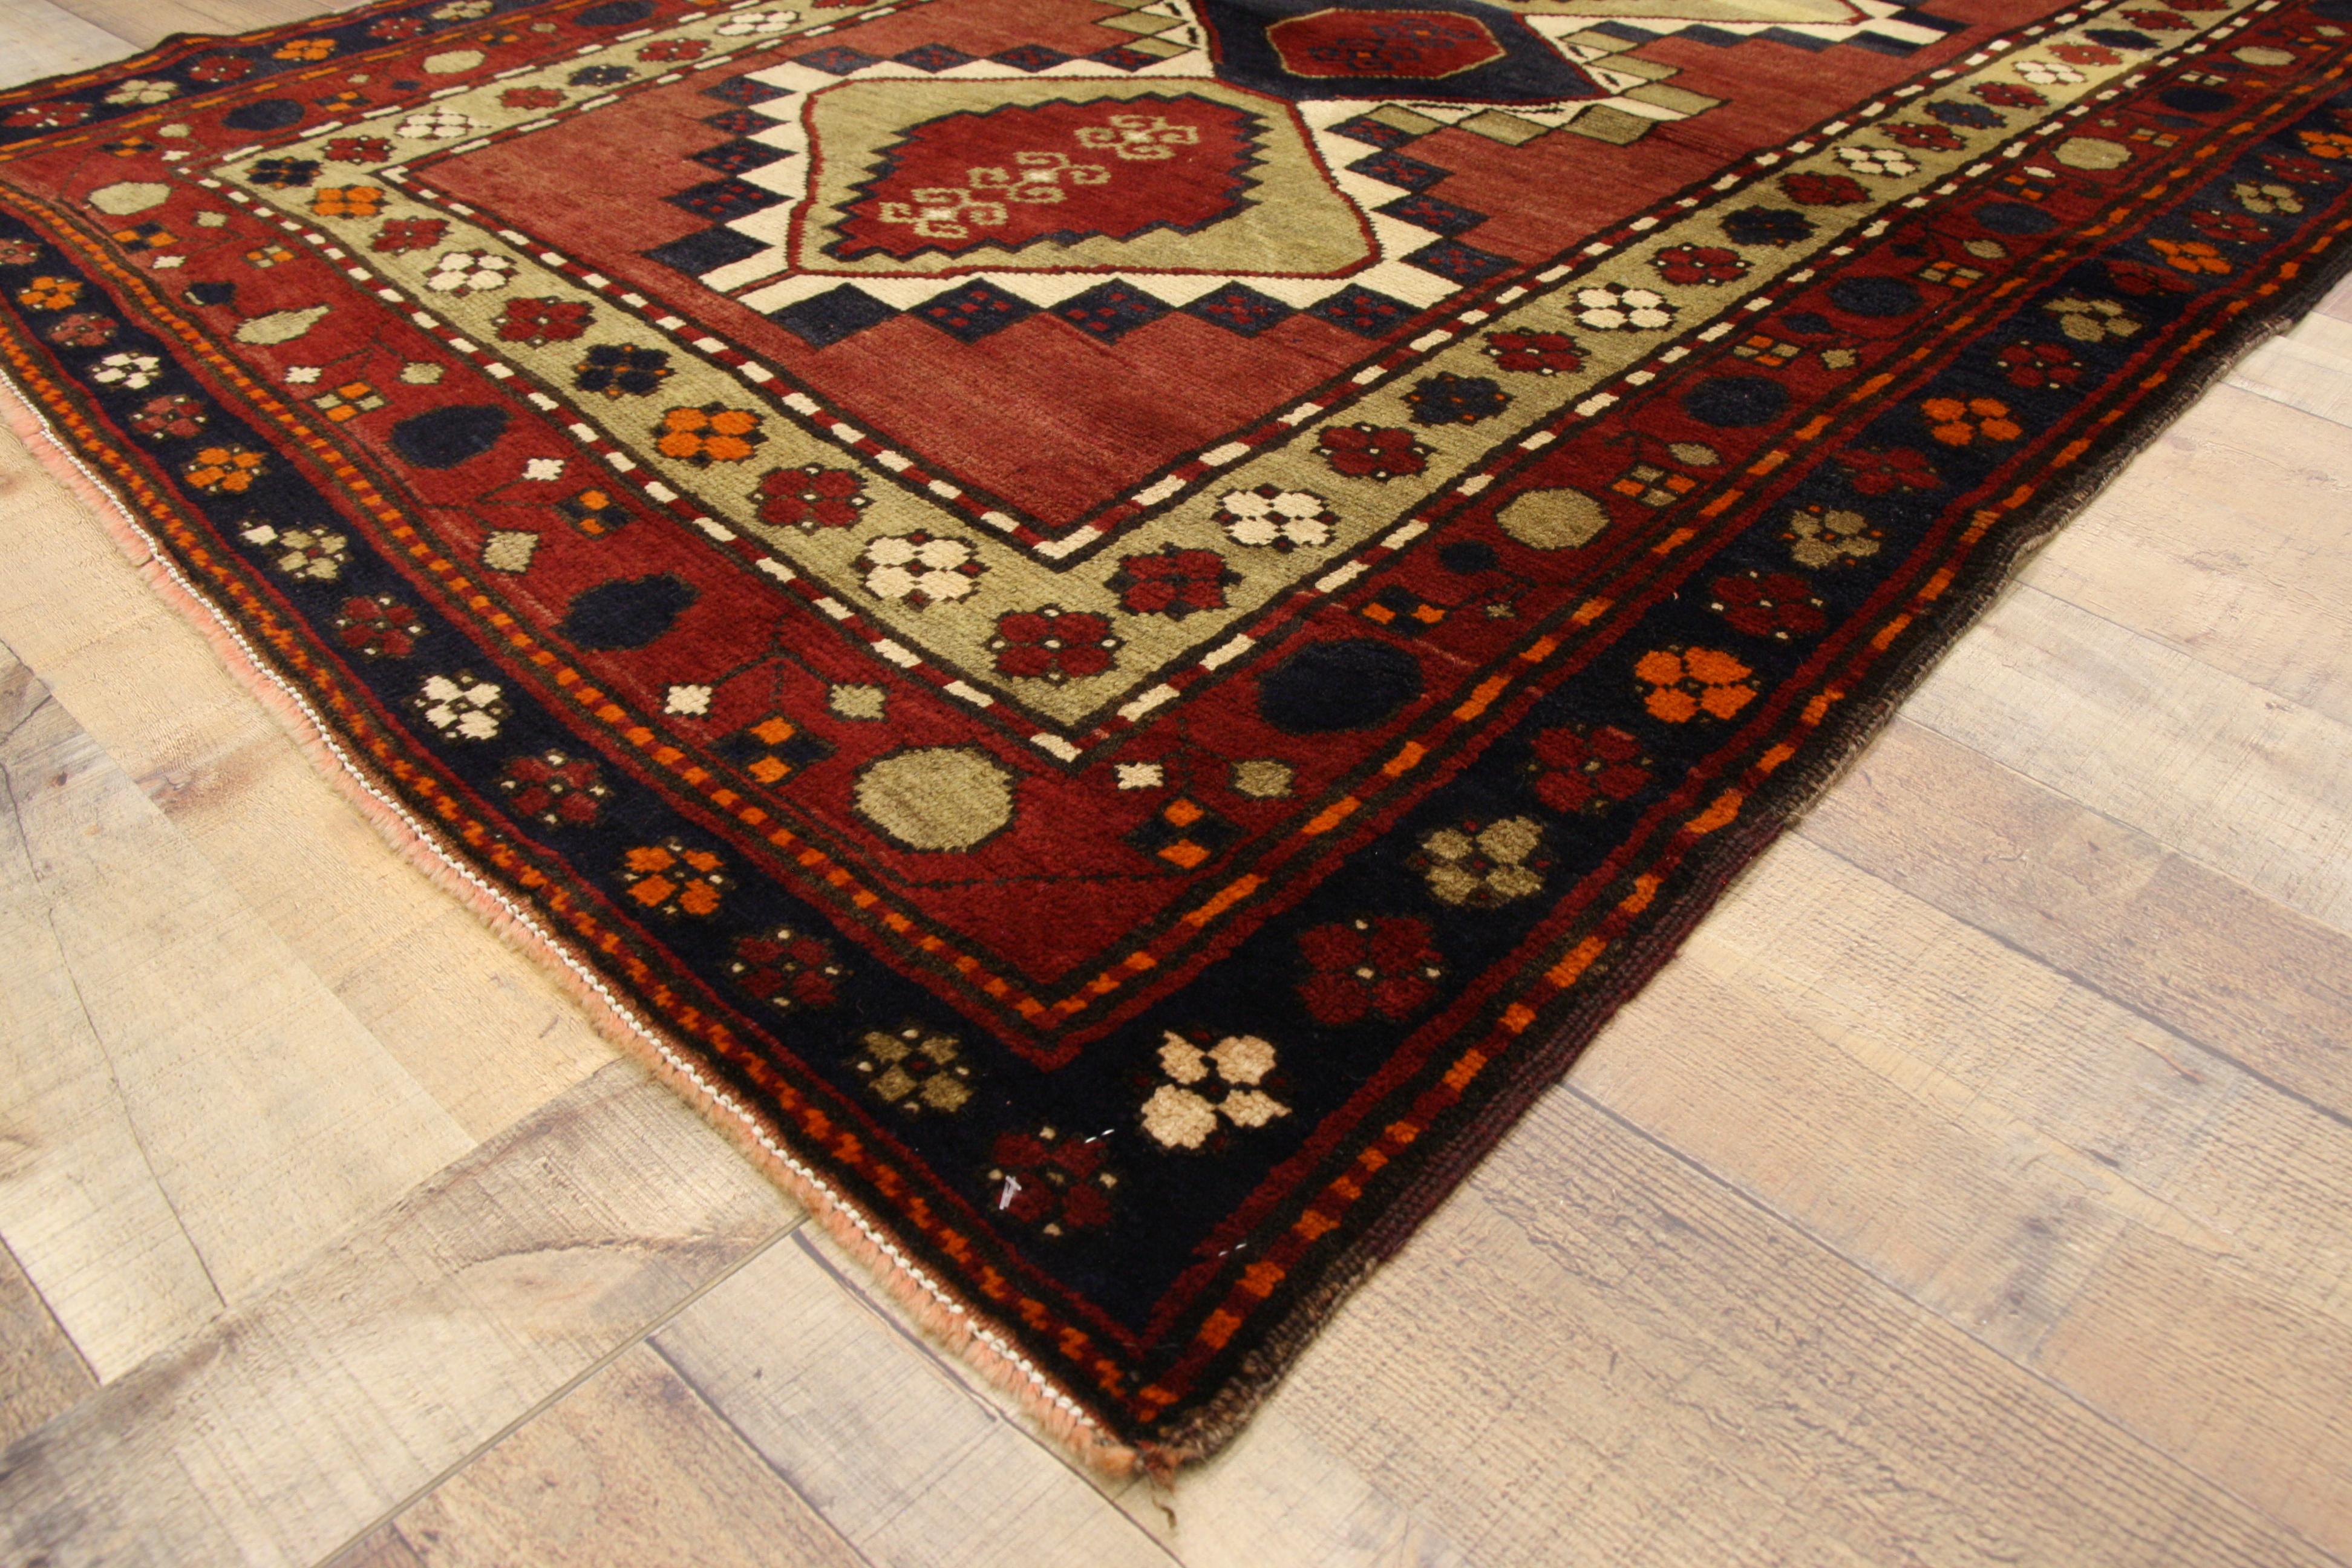 75646, vintage Persian Azerbaijan rug with tribal style. Trending home interiors showcase darker color palettes as the daylight shortens and days get darker. Autumn and Winter interior trends are about introducing warmth, elegance and luxe colors to